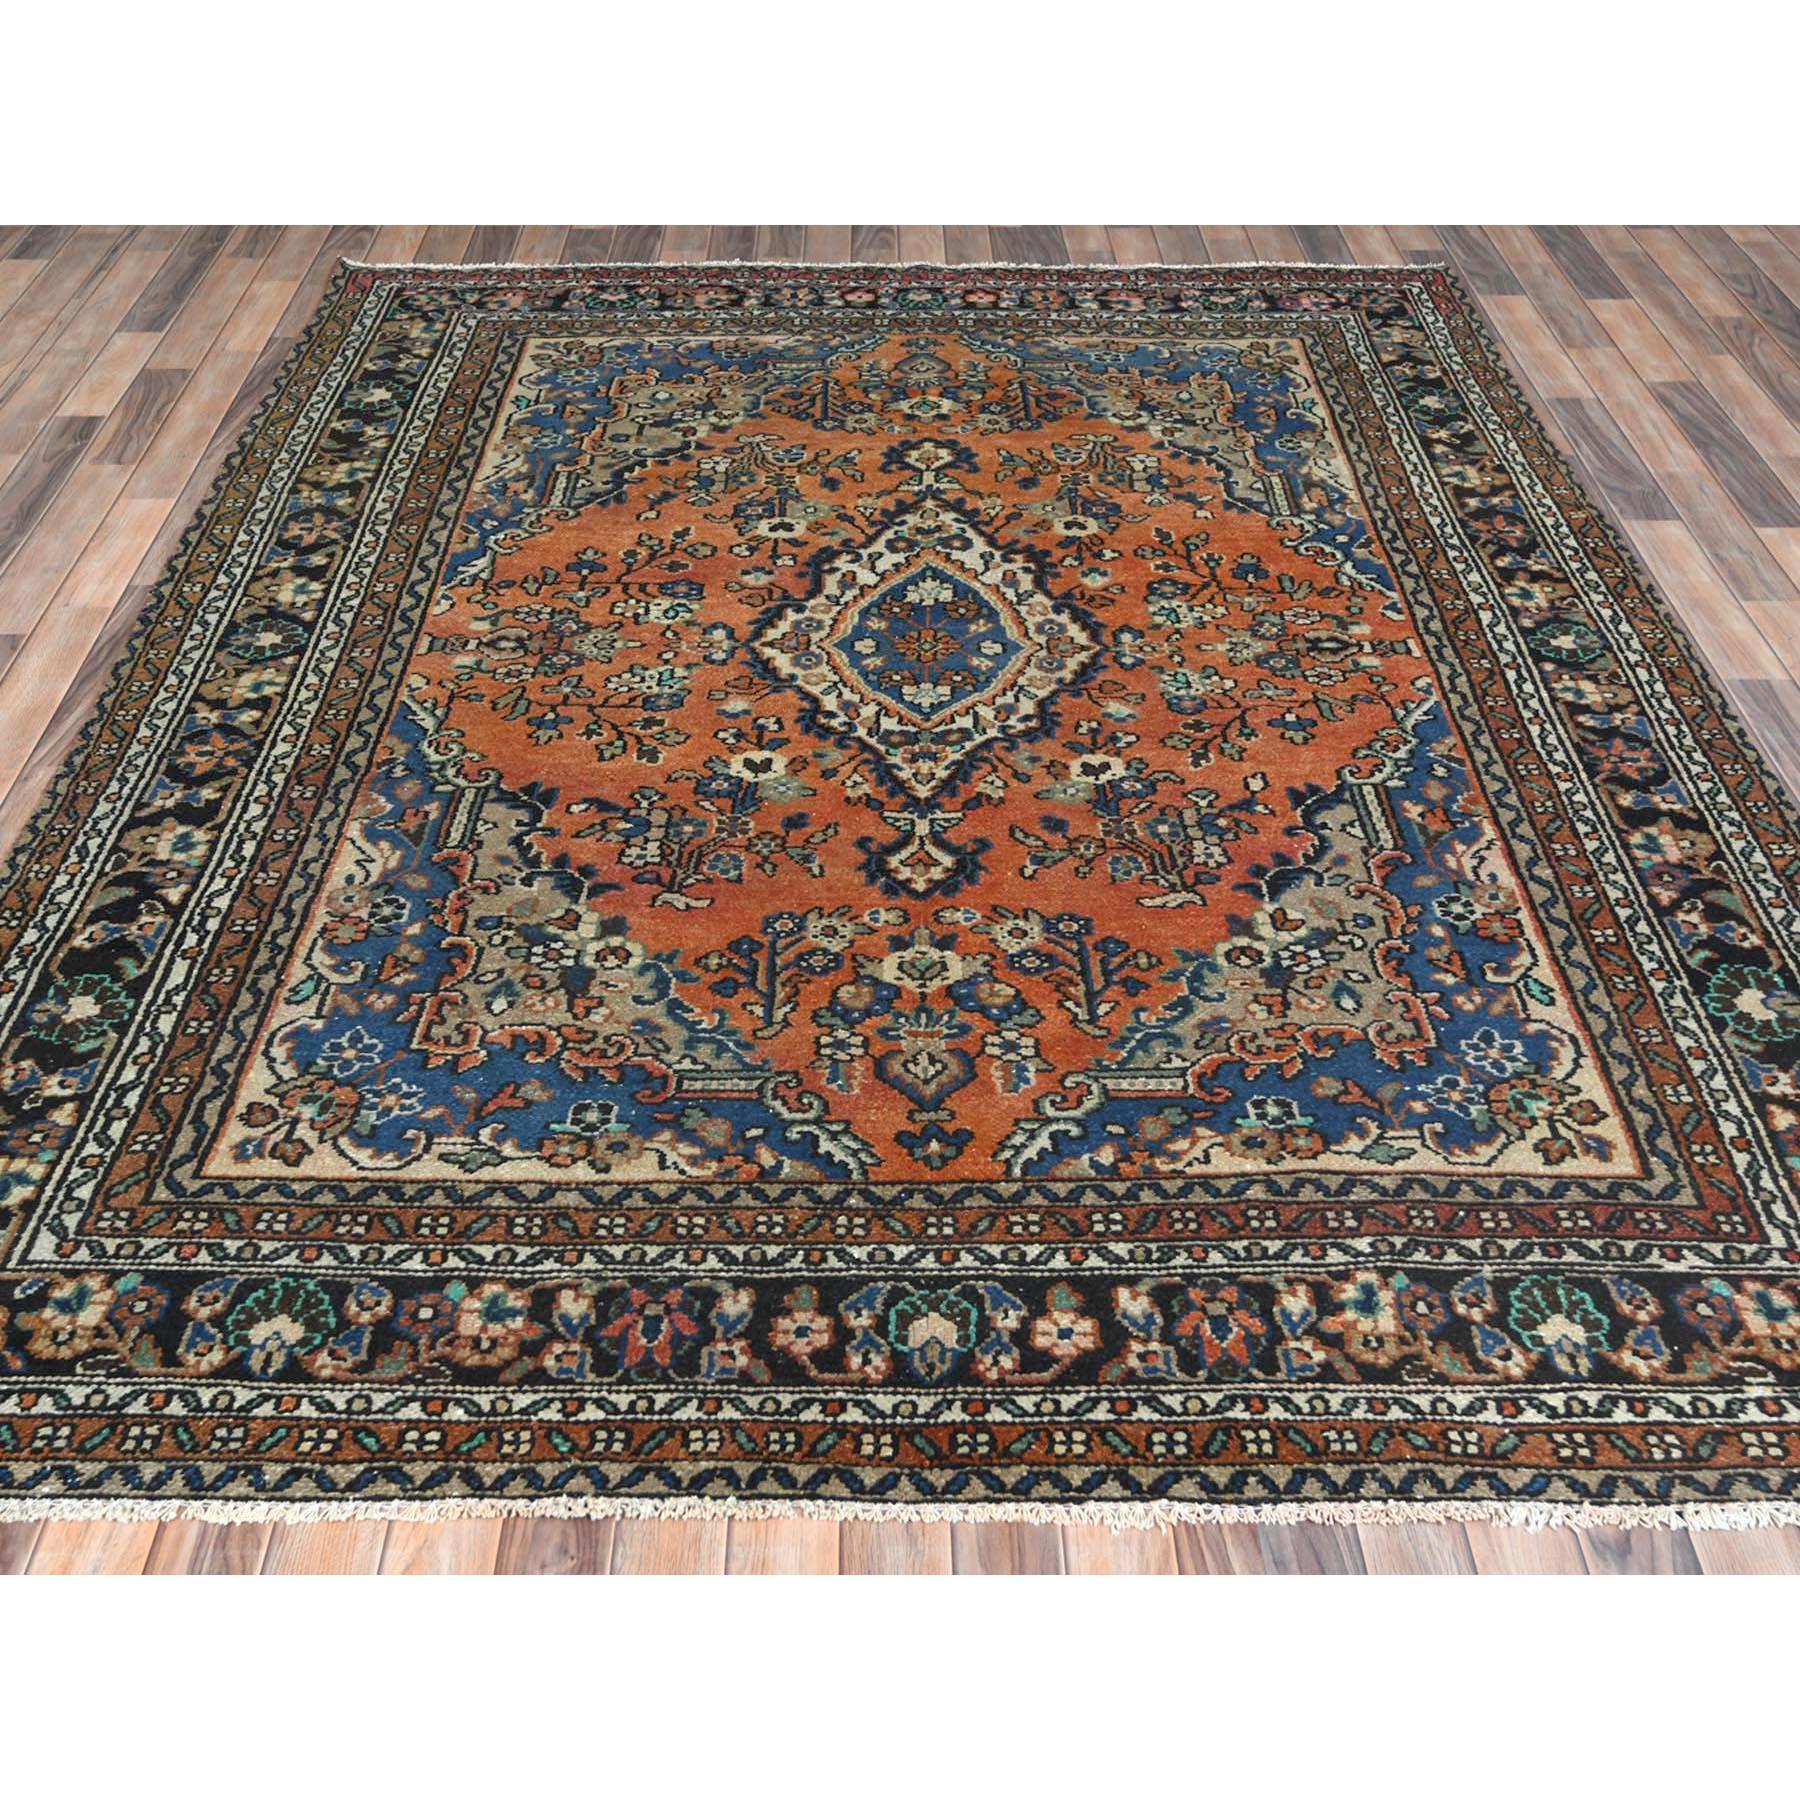 Medieval Rust Color Distressed Look Worn Wool Hand Knotted Vintage Persian Bibikabad Rug For Sale